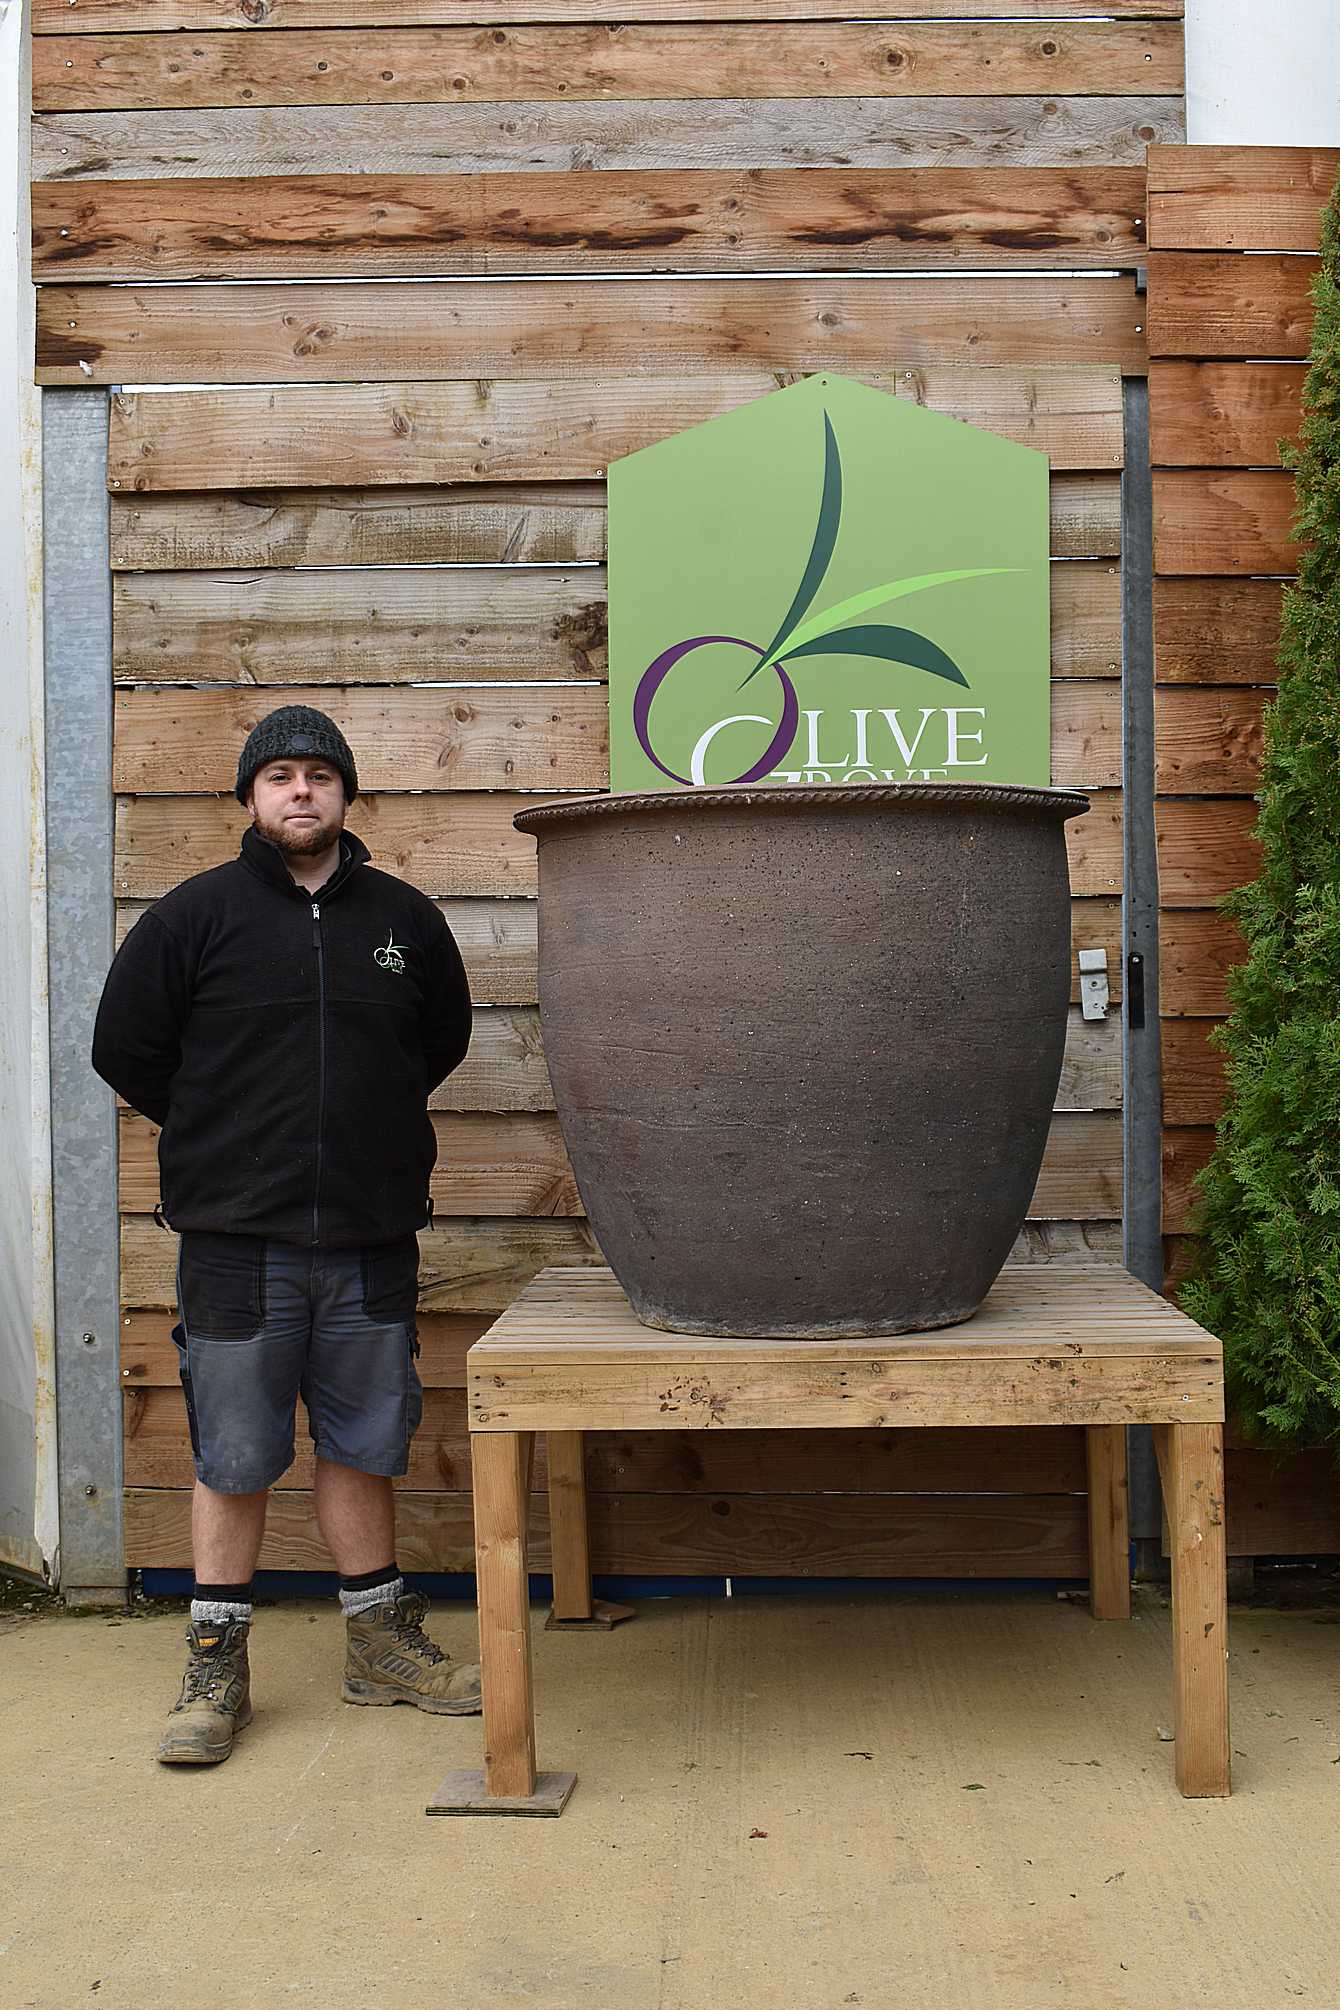 Large Old Stone Planter, Large Garden Pots For Olive Trees